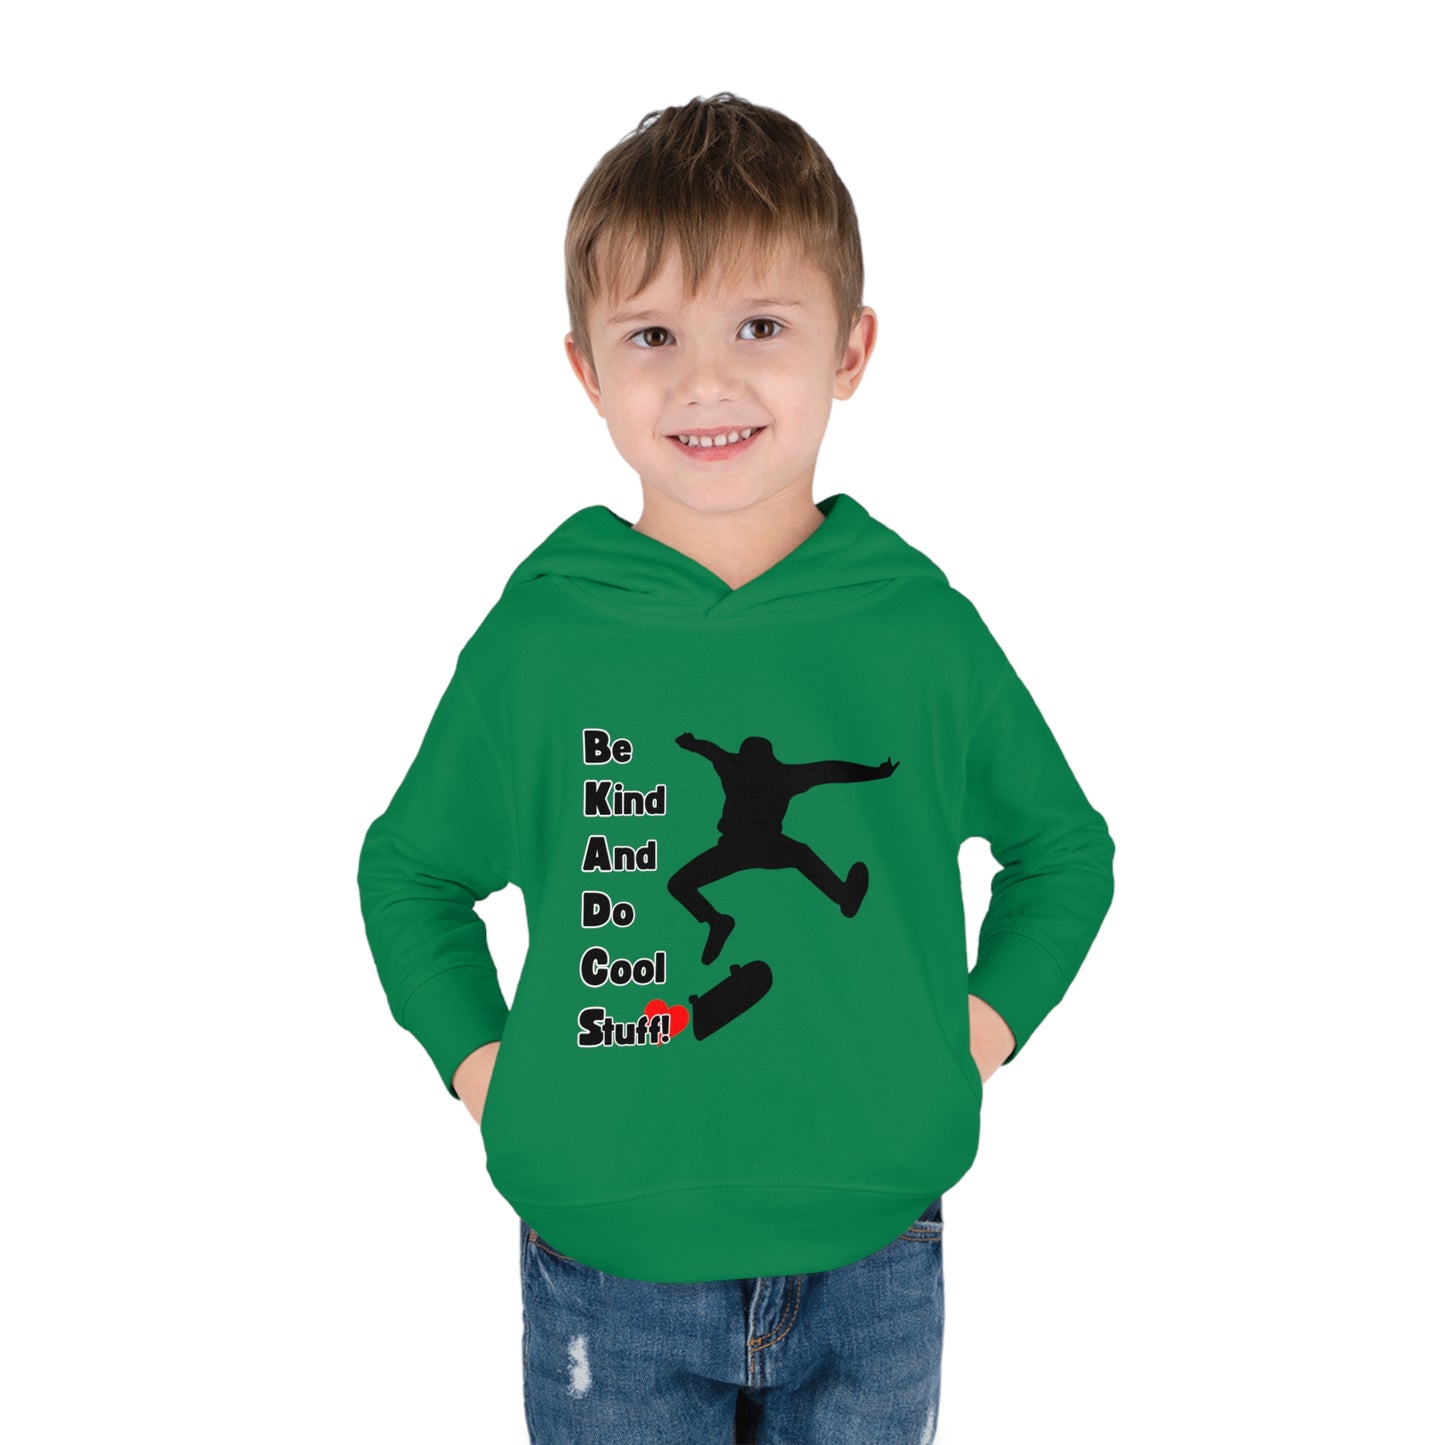 Be Kind And Do Cool Stuff! Skater Toddler Pullover Fleece Hoodie